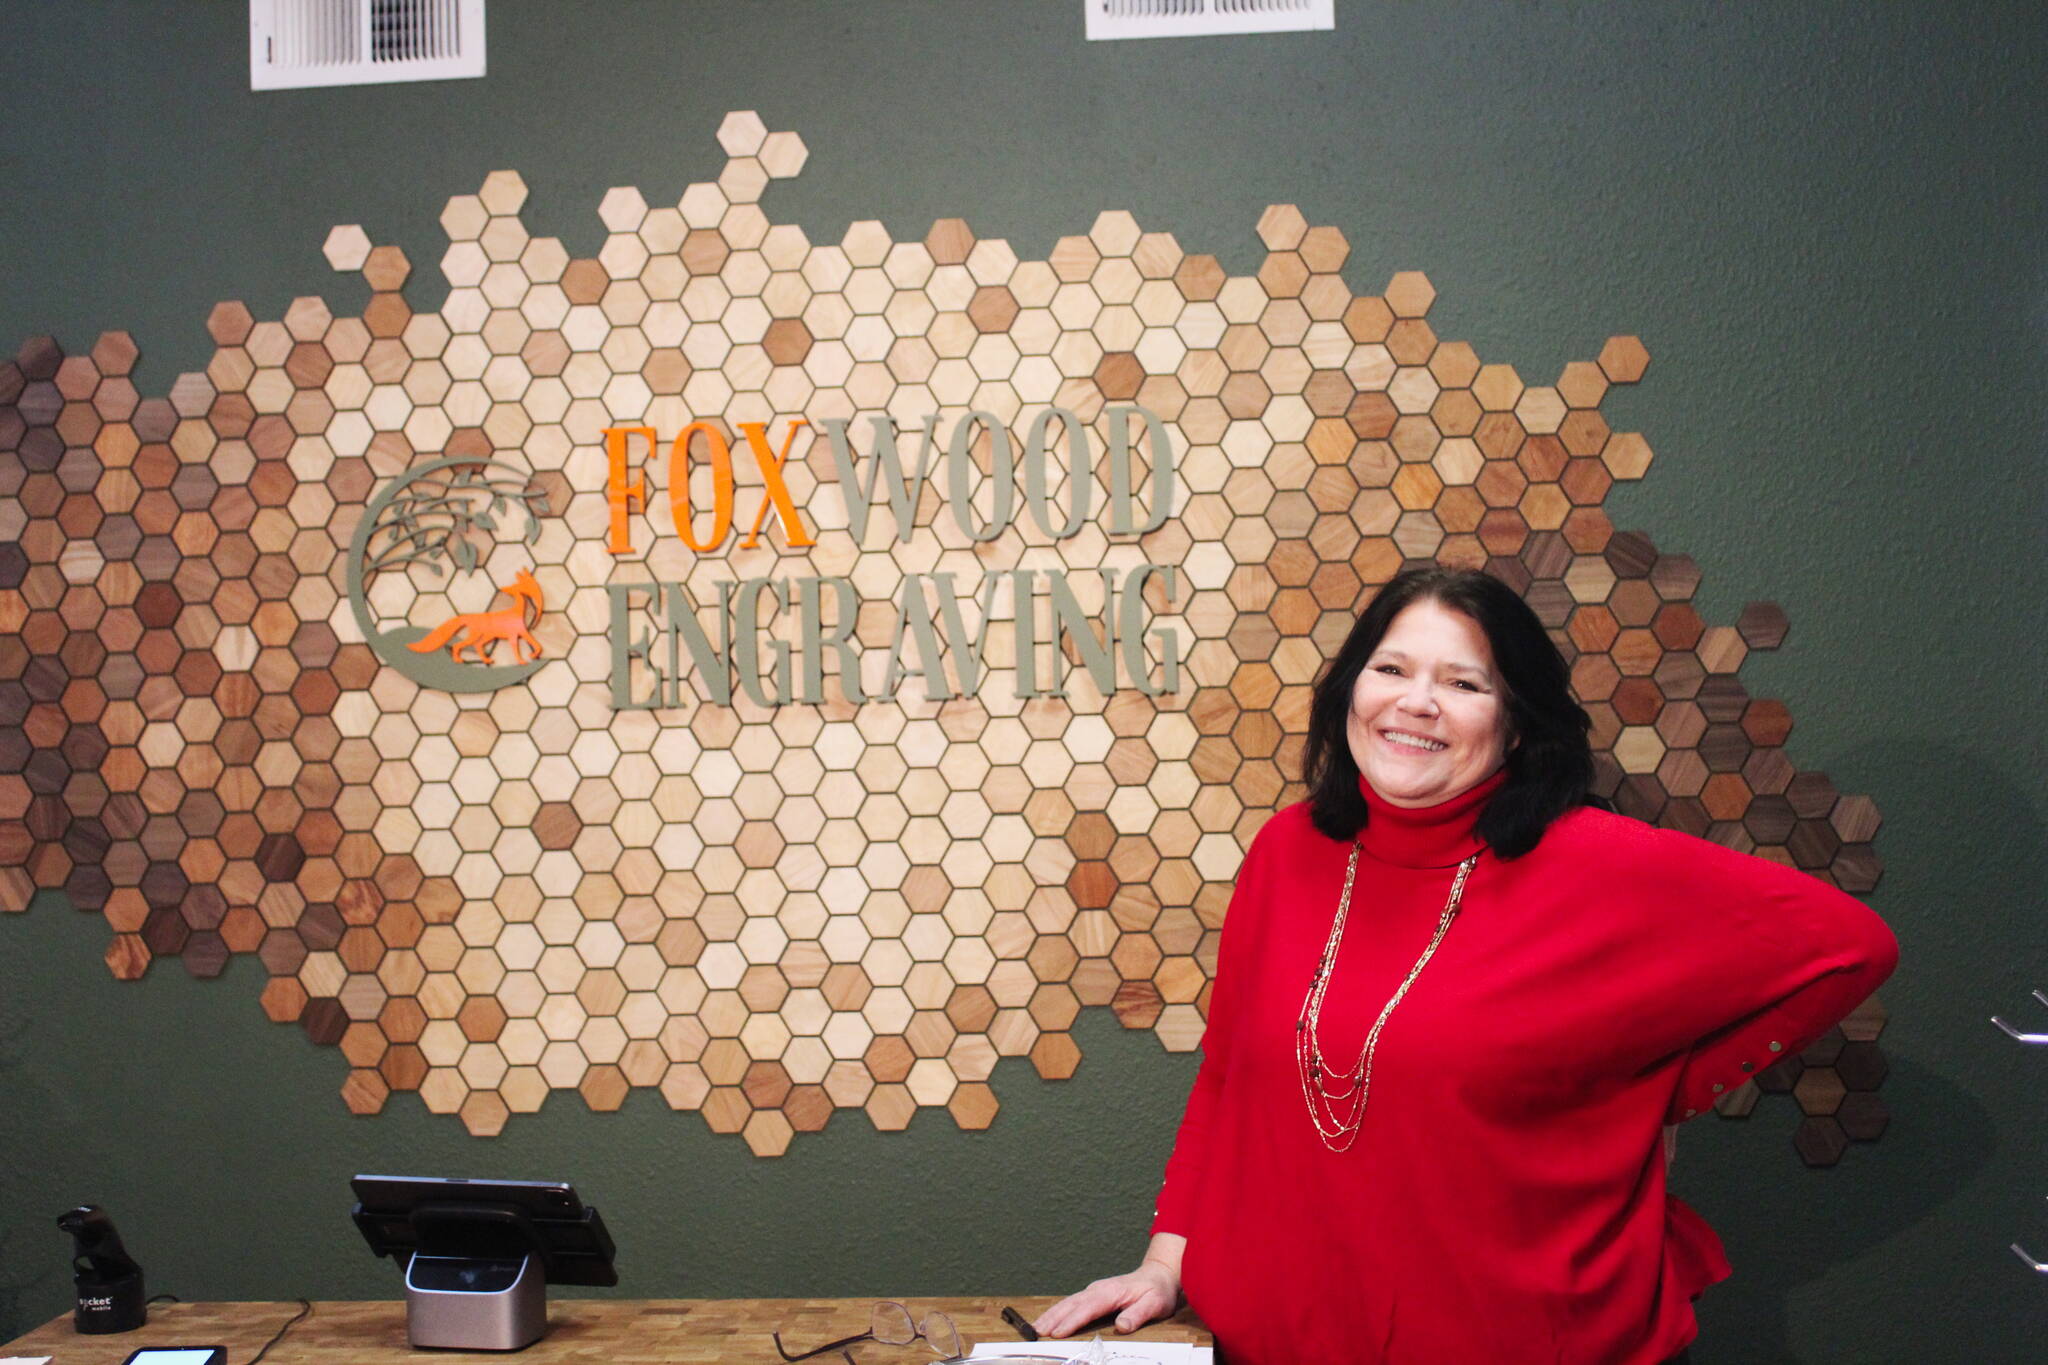 ”I fell in love with the wood,” Foxwood Engraving owner Joanna Lis said of her use of laser-cut wooden gifts and decor. Photo by Bailey Jo Josie/Alb Media.